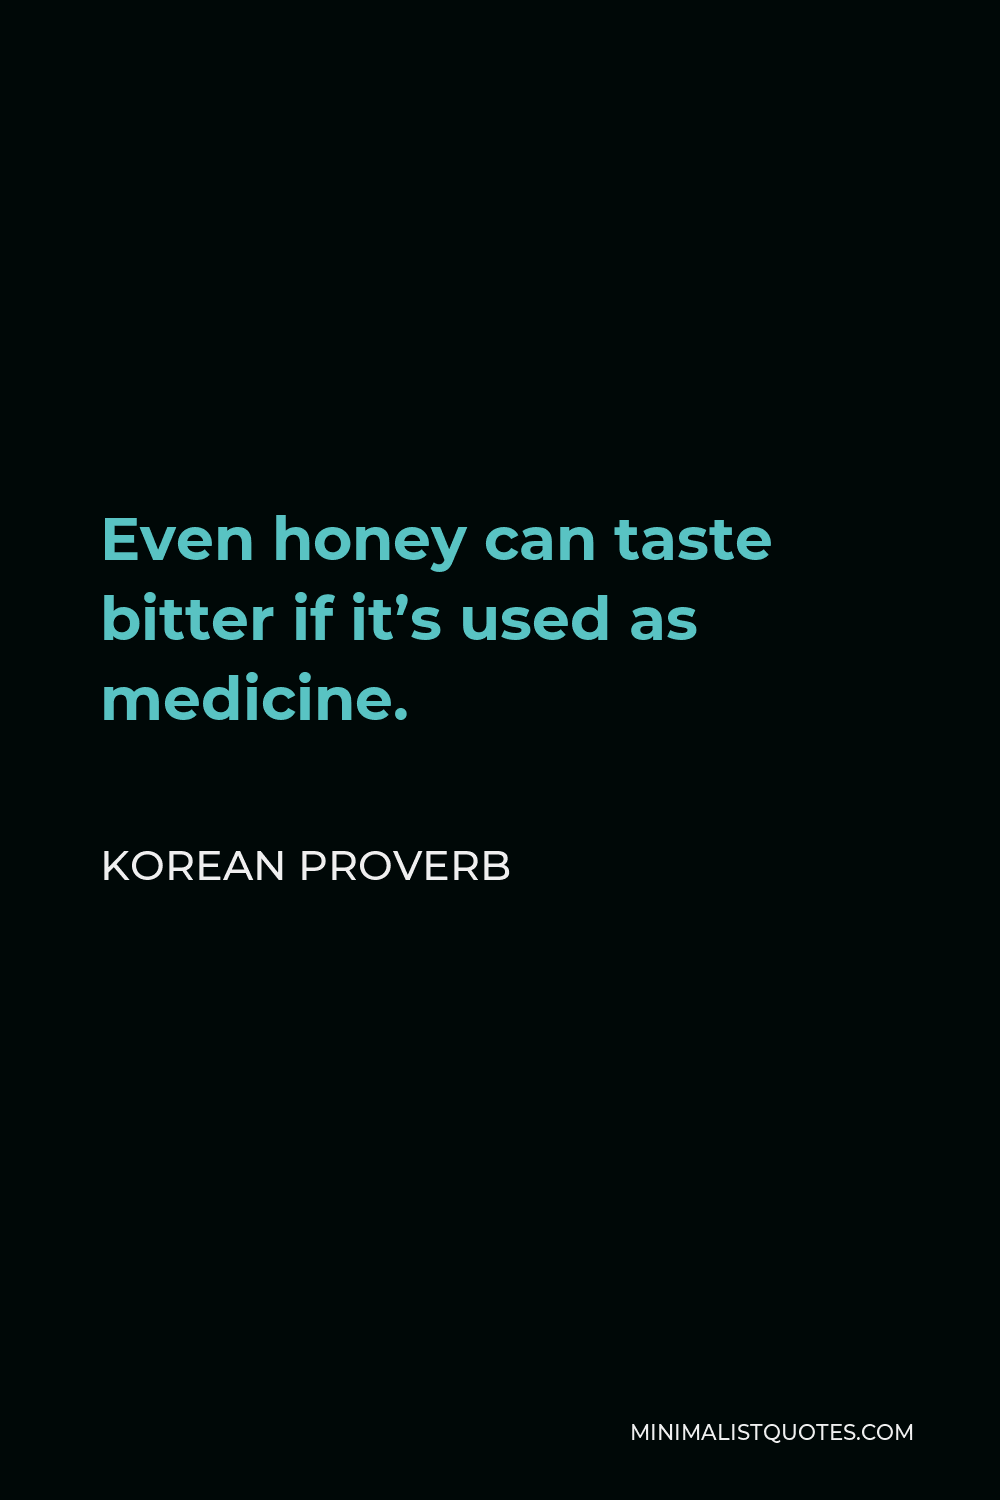 Korean Proverb Quote - Even honey can taste bitter if it’s used as medicine.